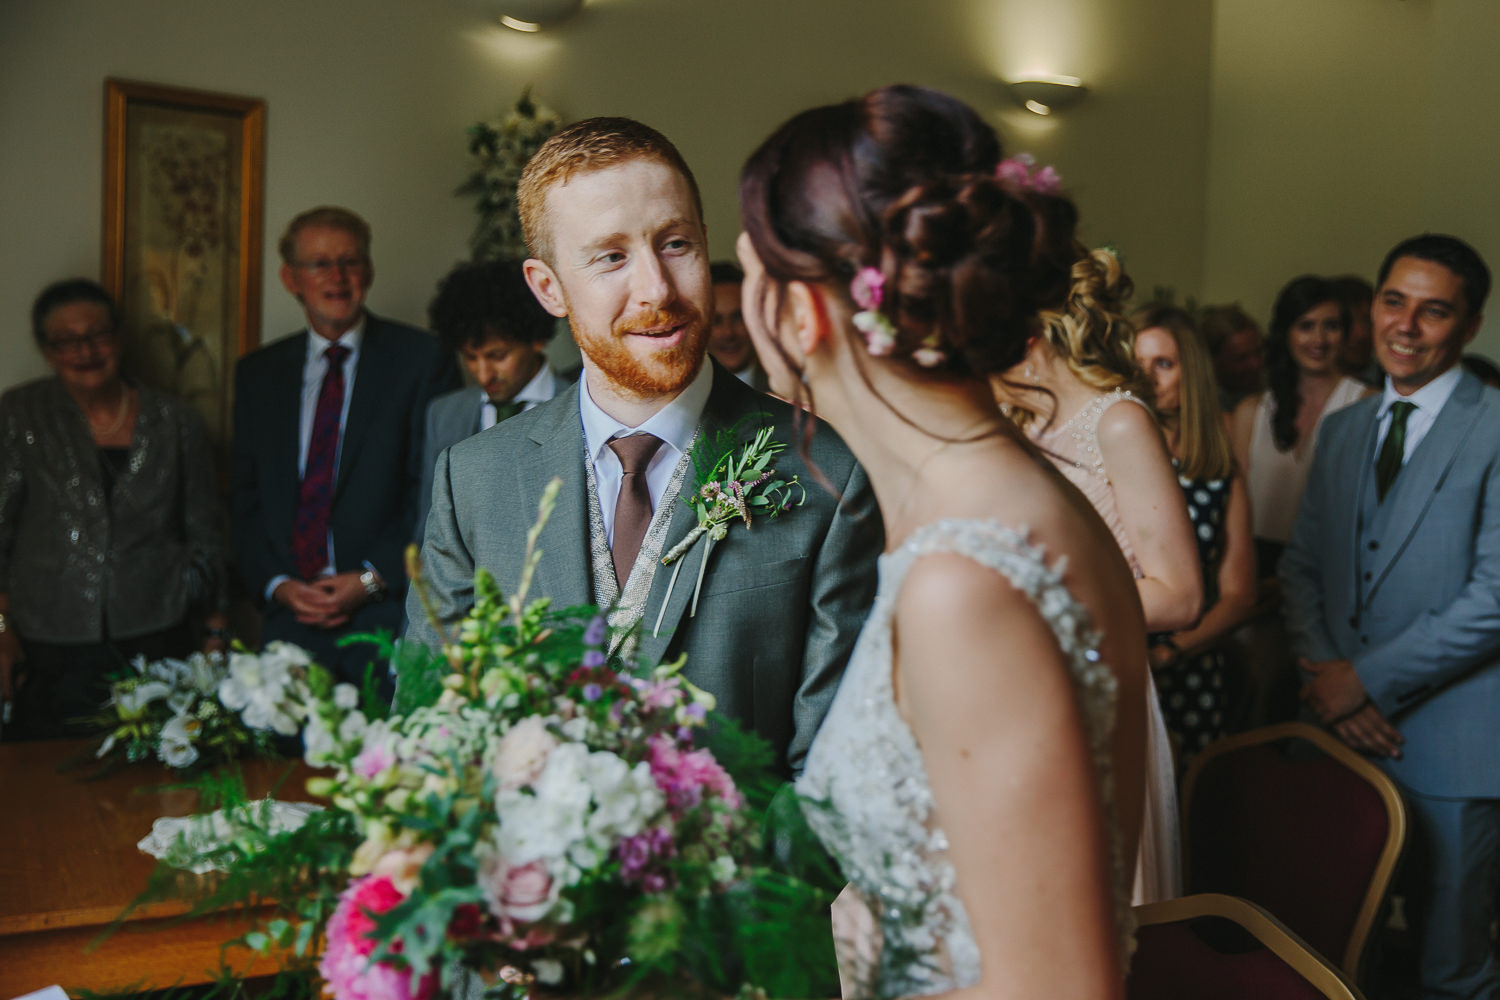 Groom greeting bride before the start of the wedding ceremony inside Ely Registry office, photographed by an Ely Wedding Photographer